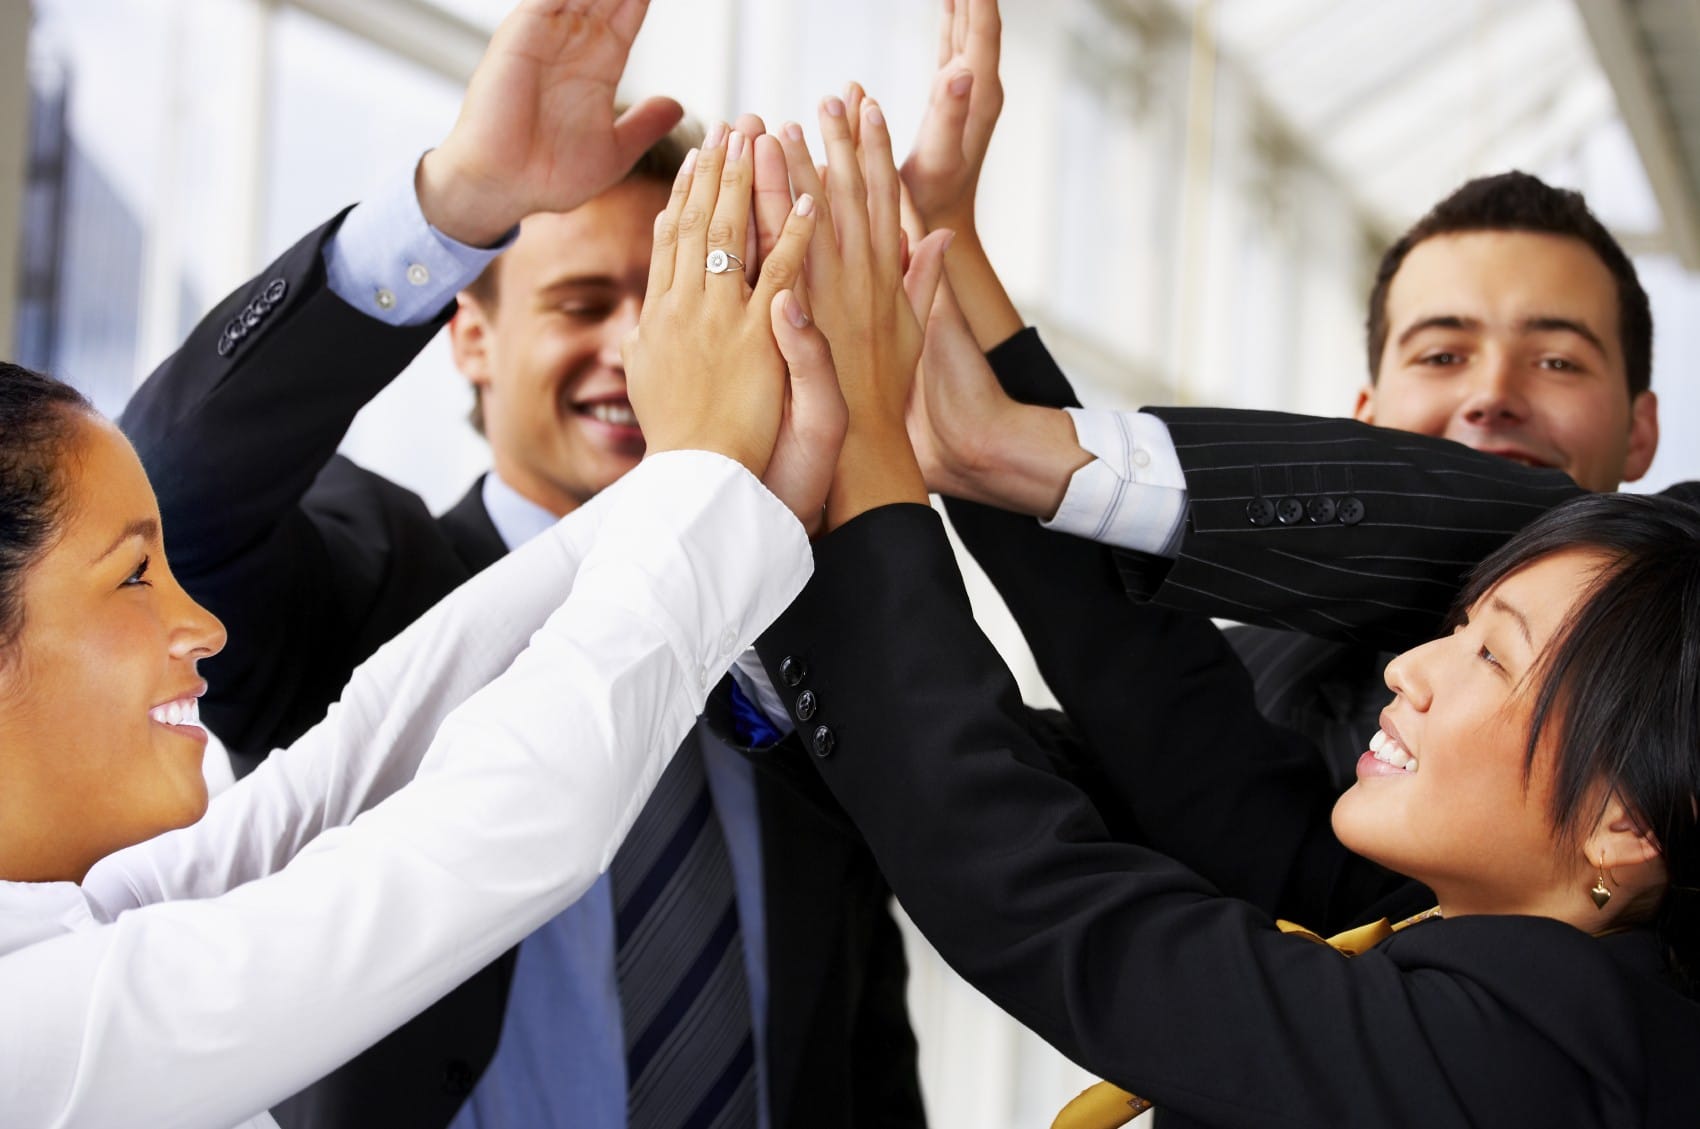 A stock photo of employees high-fiving one another